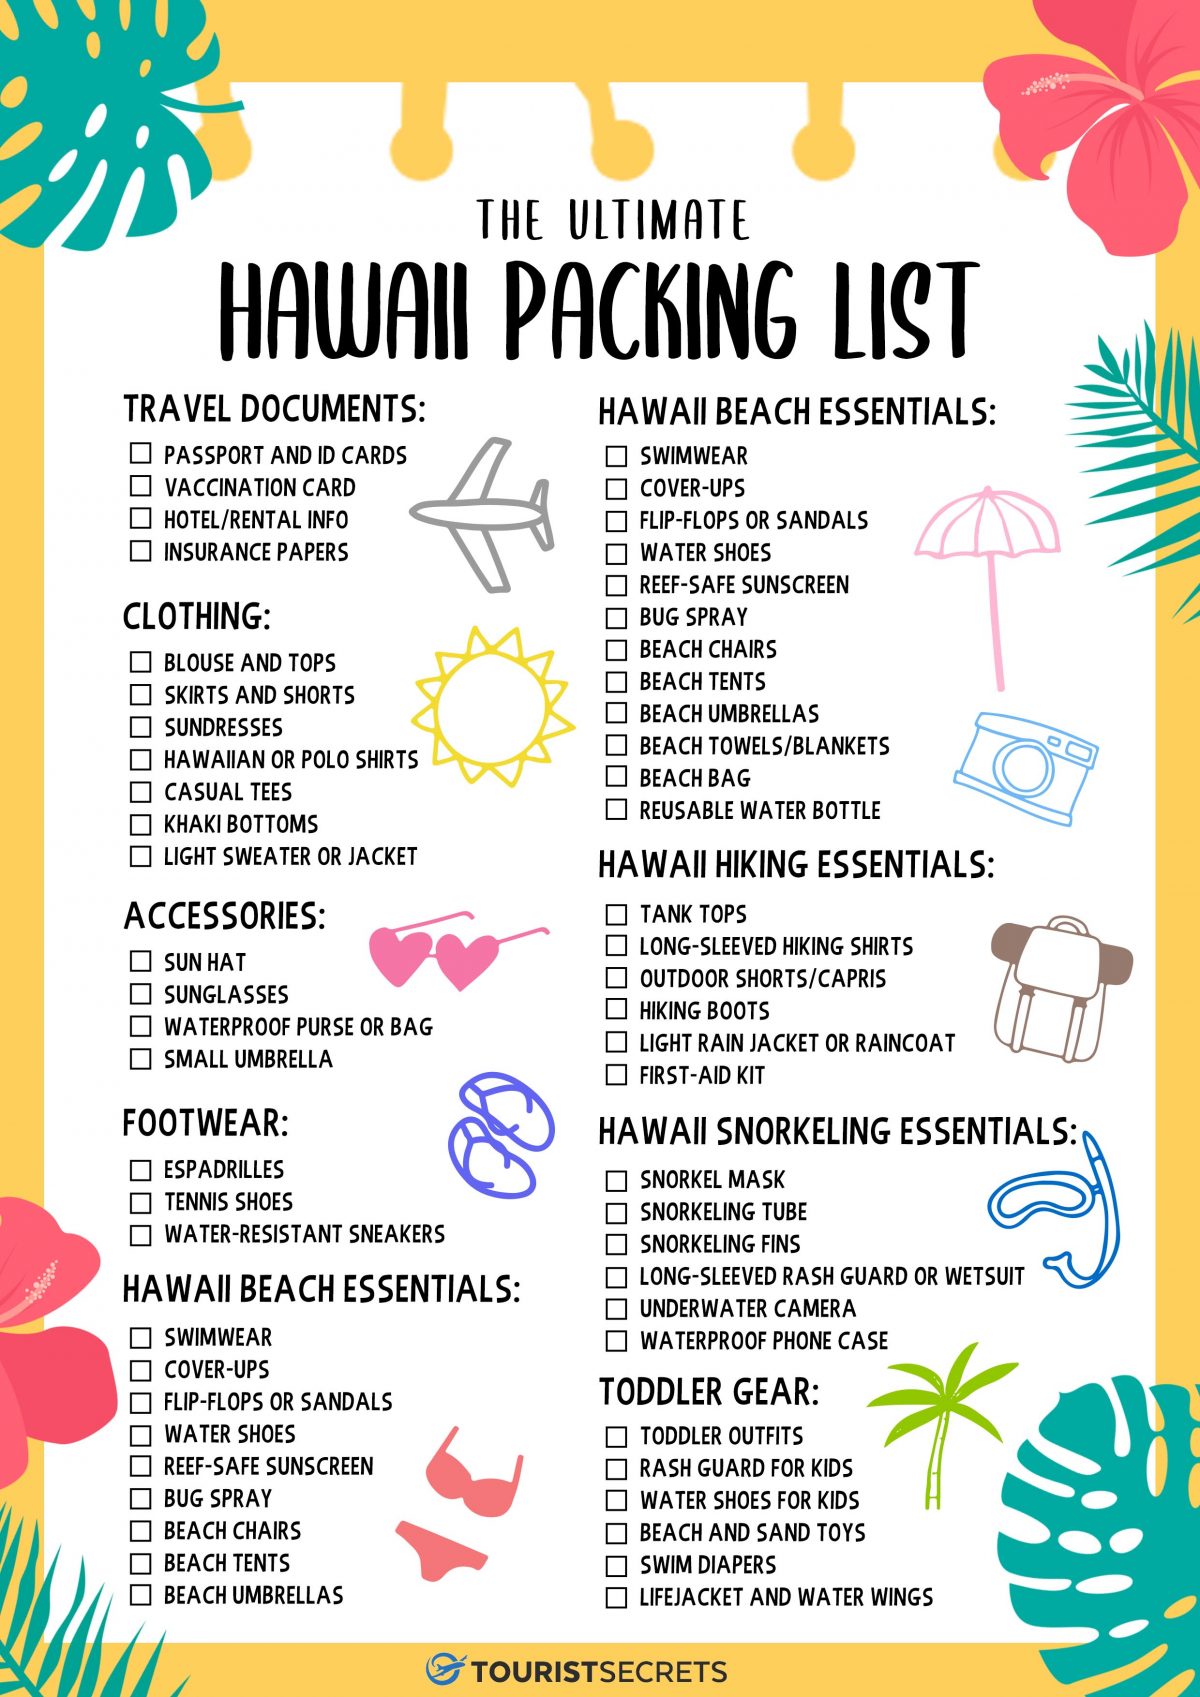 hawaii-packing-list-what-to-bring-and-what-to-skip-touristsecrets